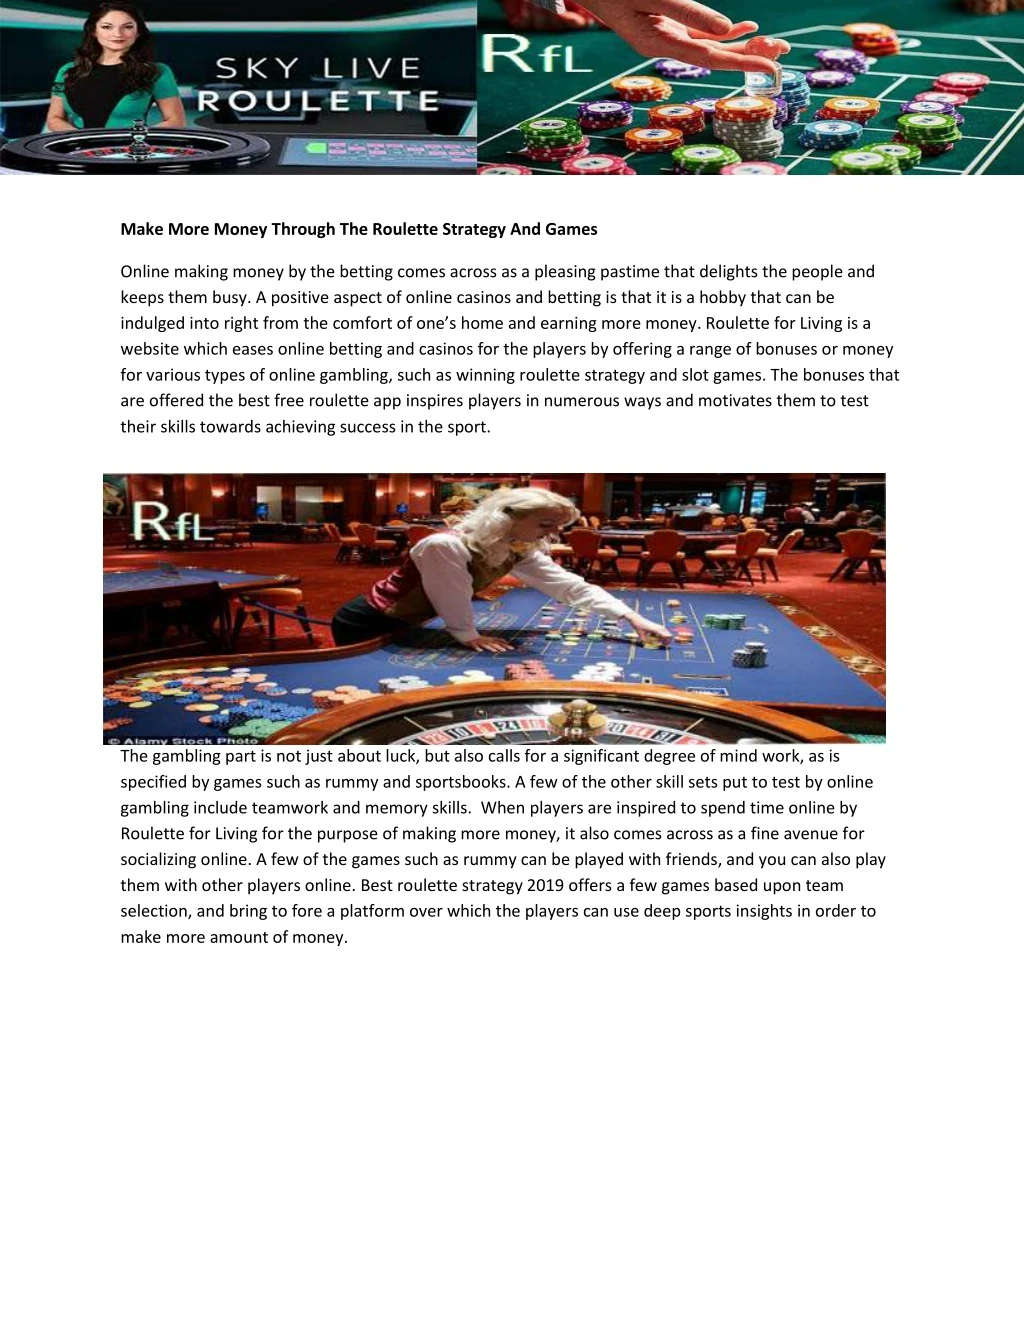 make more money through the roulette strategy